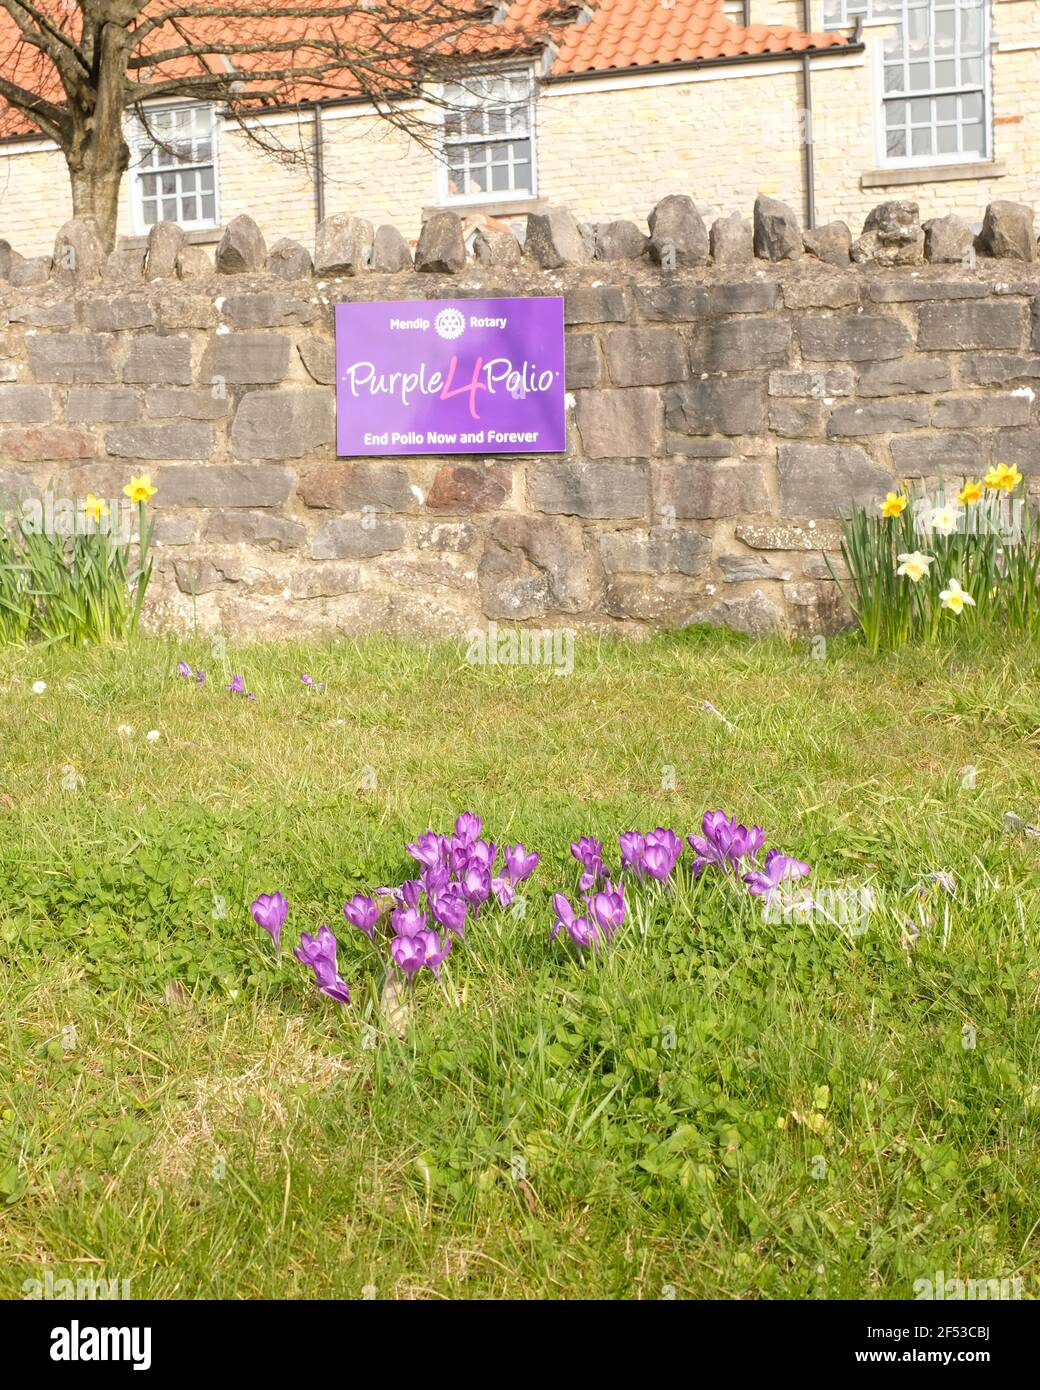 March 2021 - Crocus plants in front of Purple4Polio charity sign Stock Photo